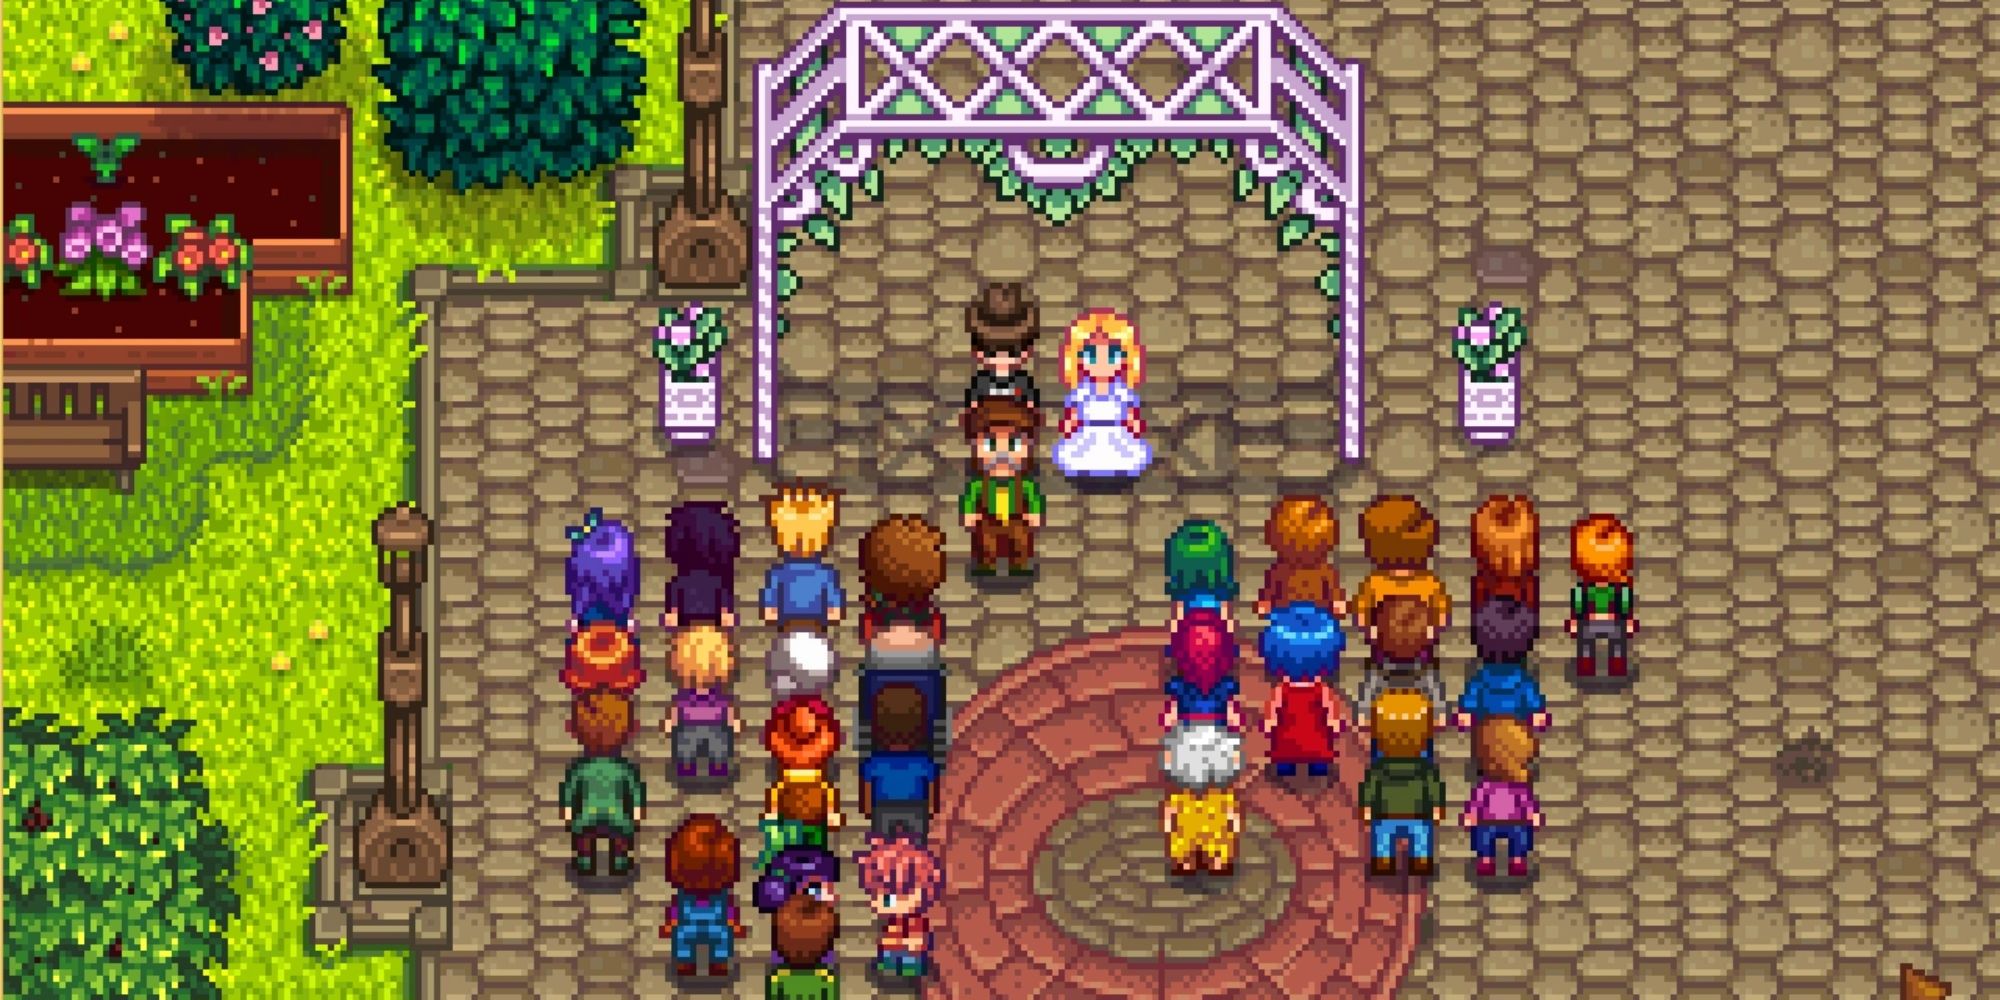 A wedding in the town between the player and Hailey